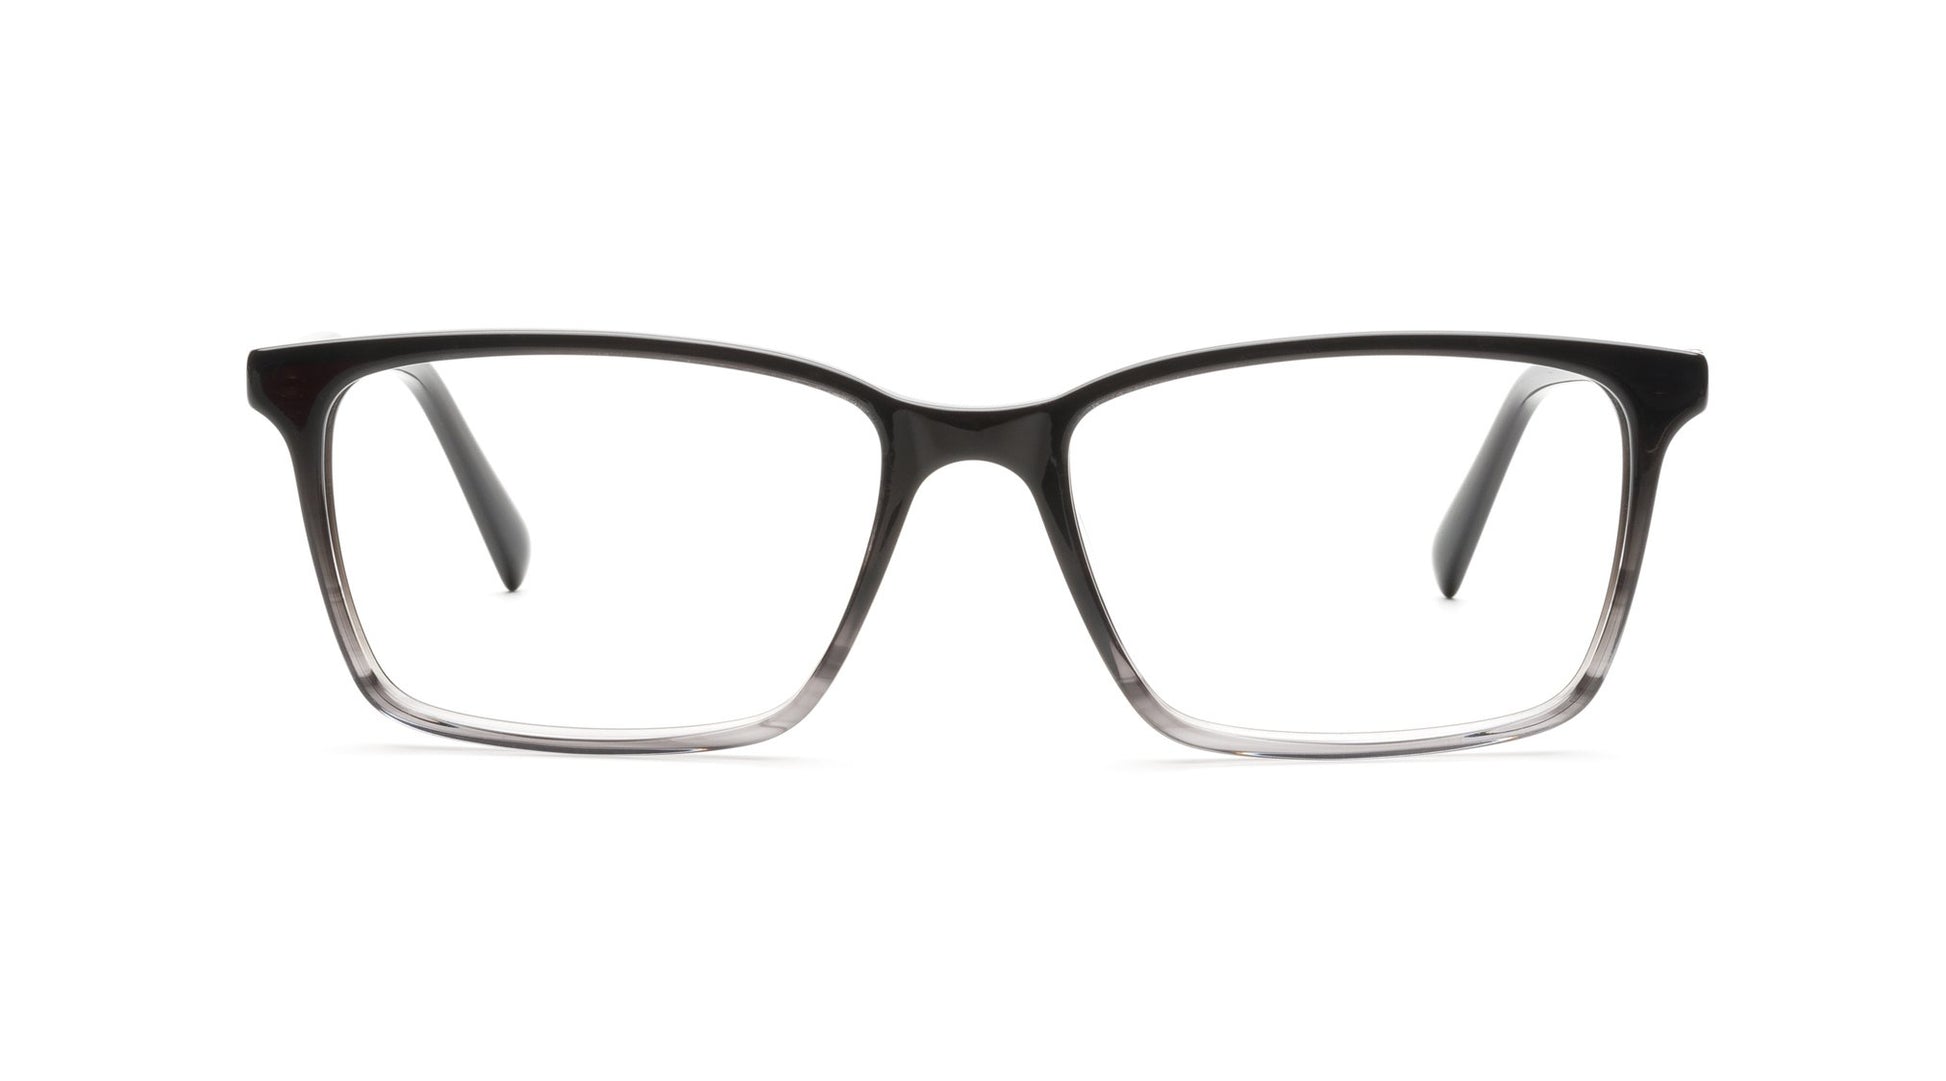 The Akon is a larger rectangle that is simple and refined. A classic frame built to last.